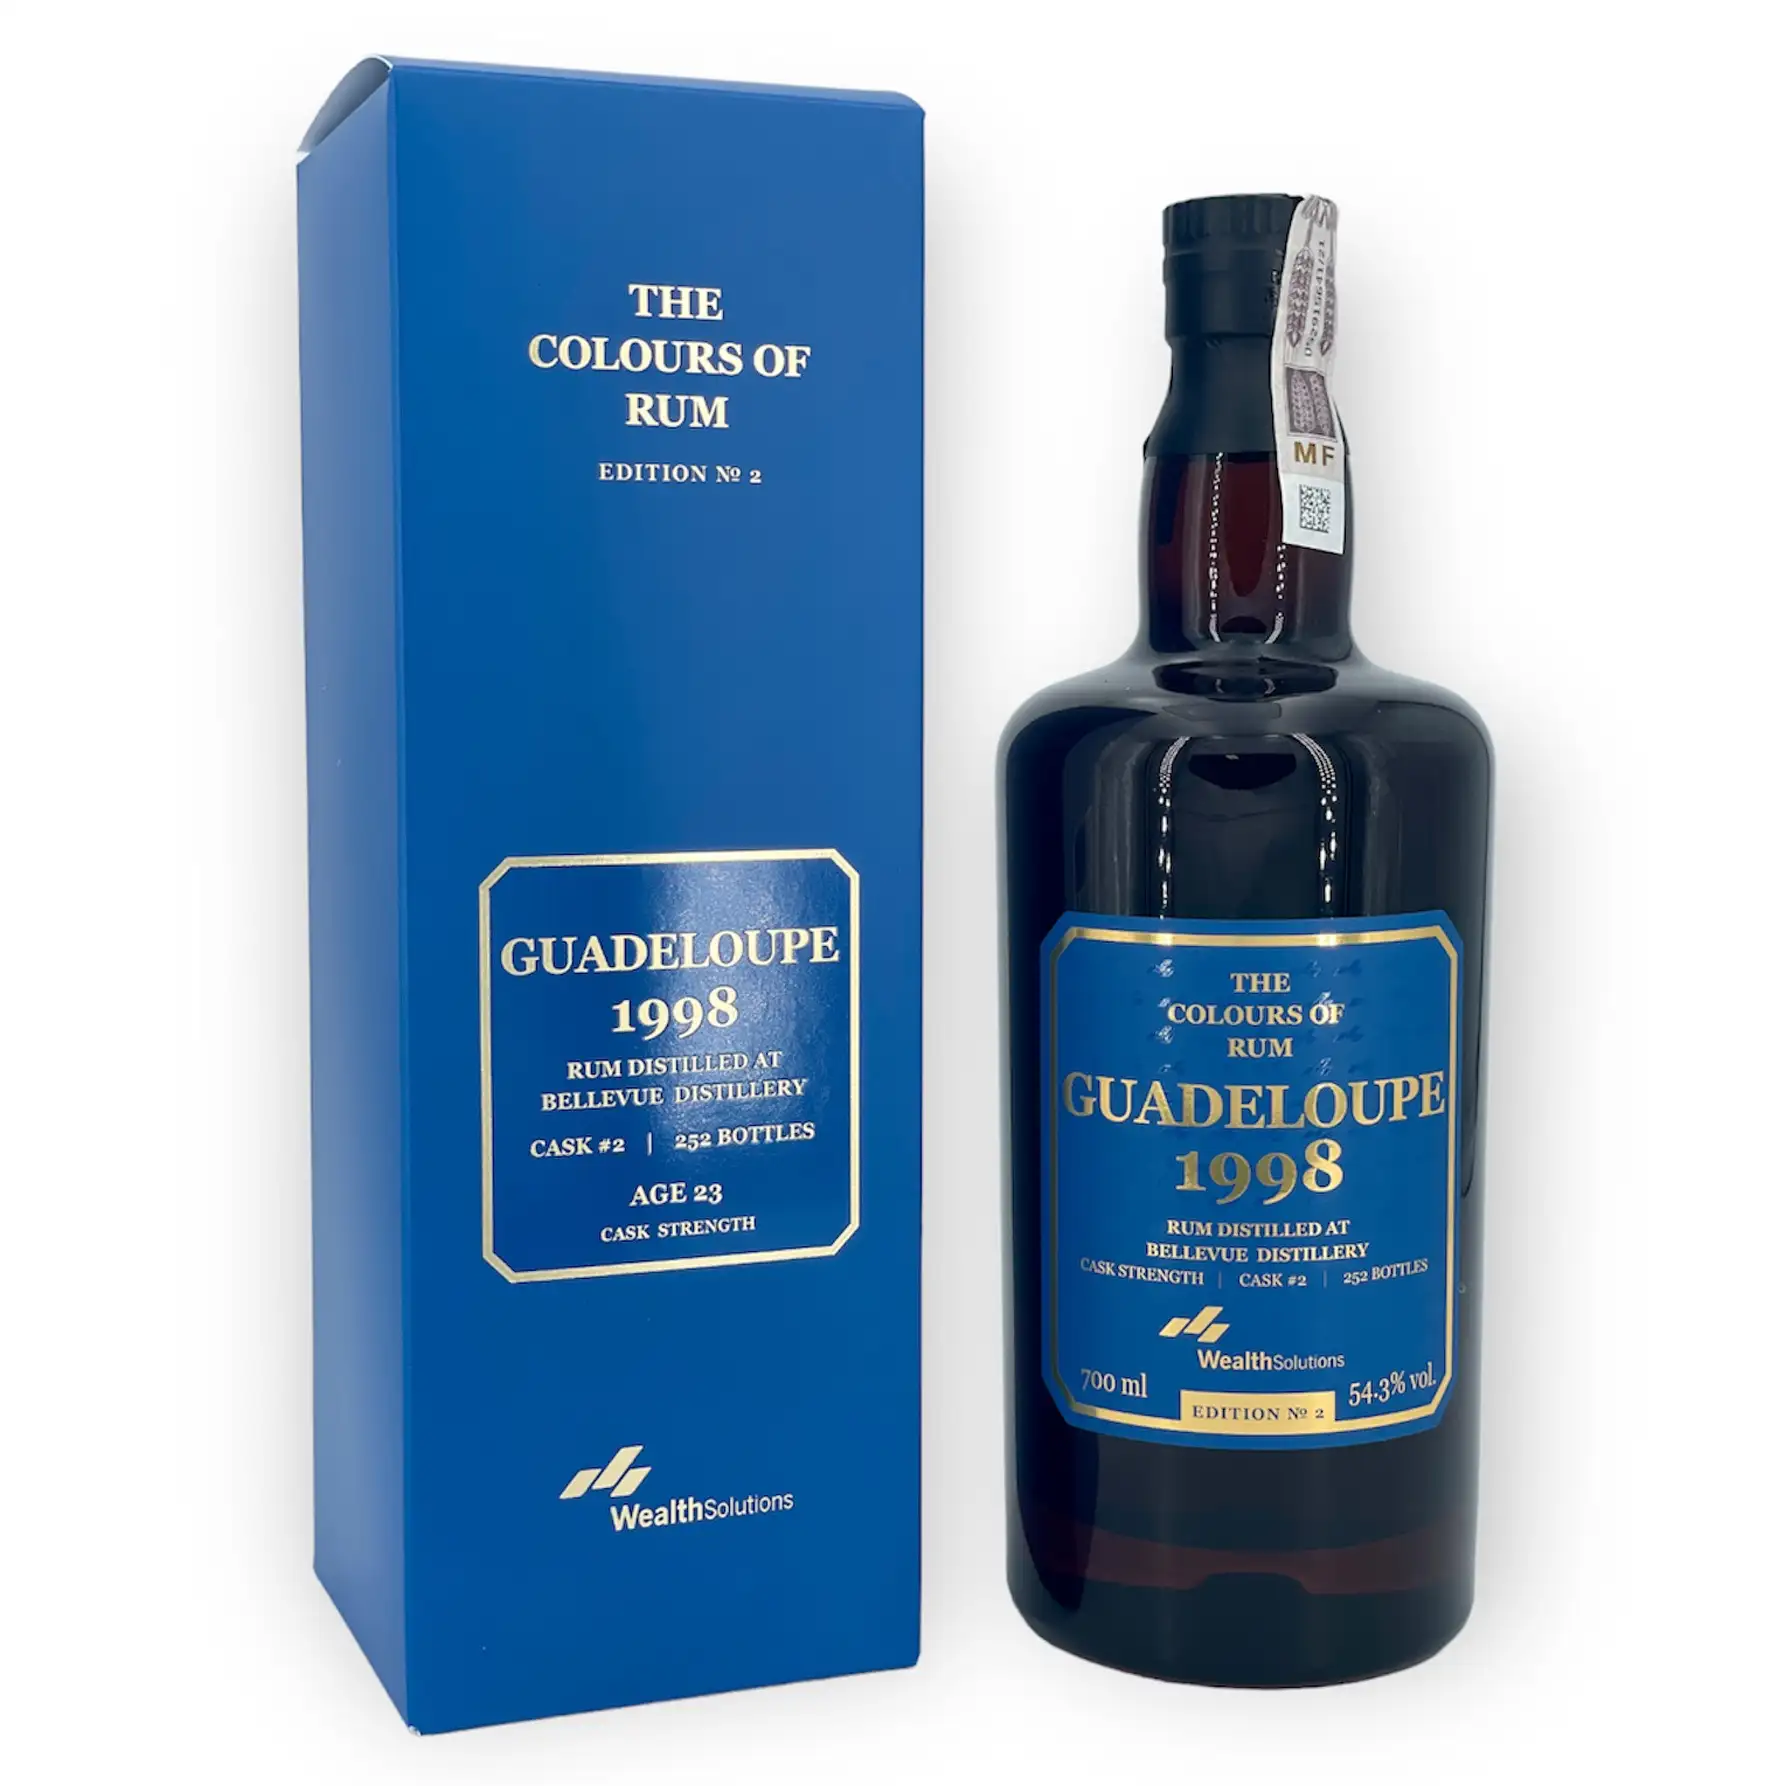 Image of the front of the bottle of the rum Guadeloupe No. 2